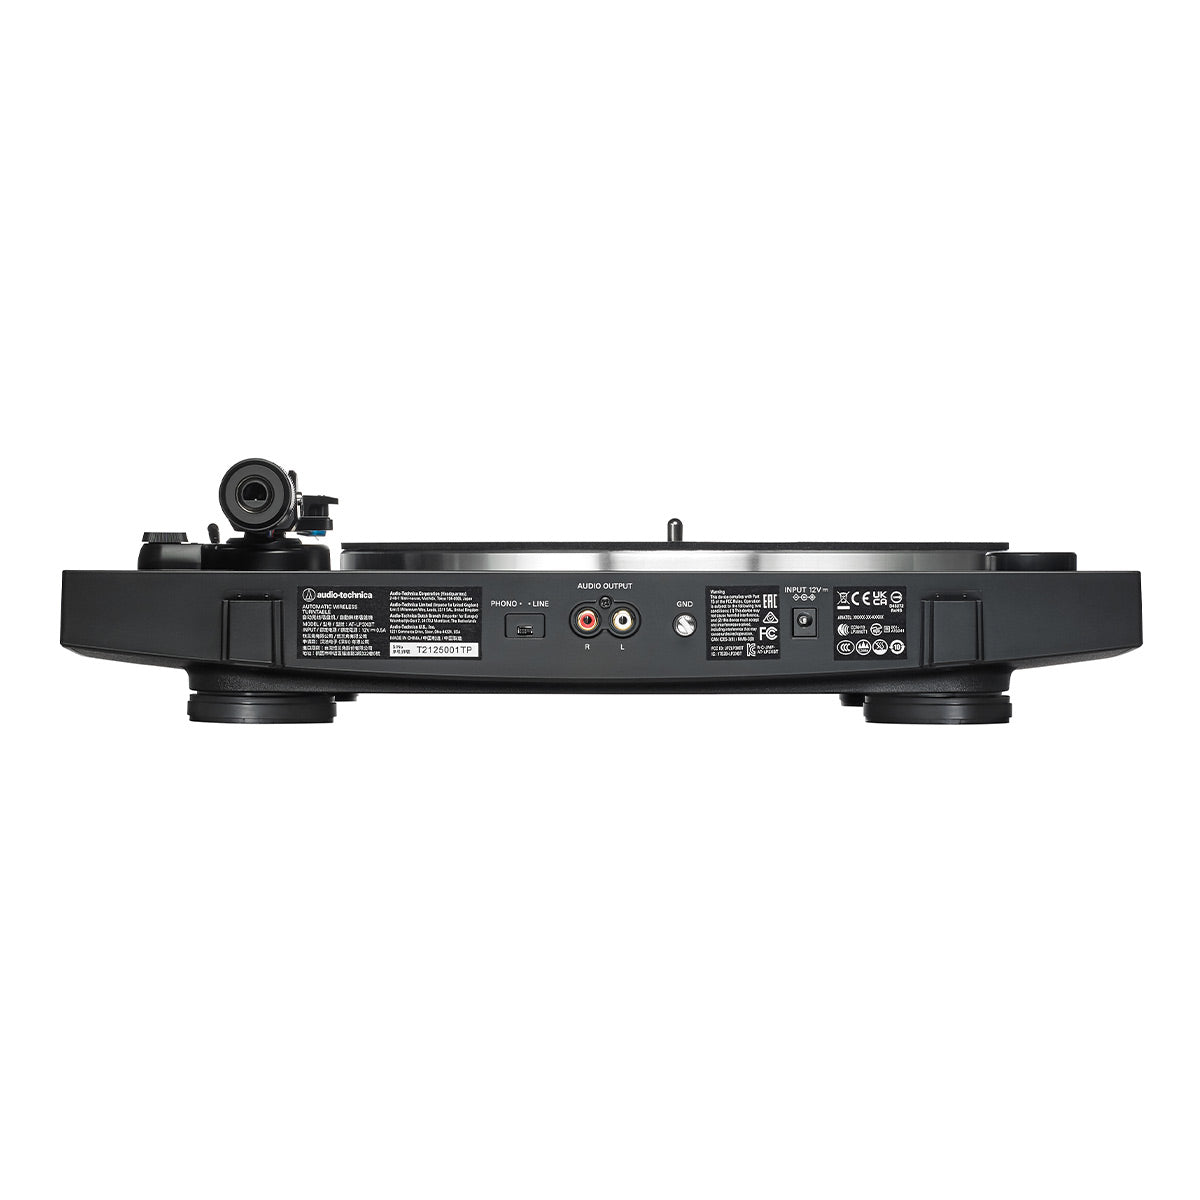 AudioTechnica AT-LP3xBT Fully Automatic Wireless Belt-Drive Turntable with Bluetooth (Black)